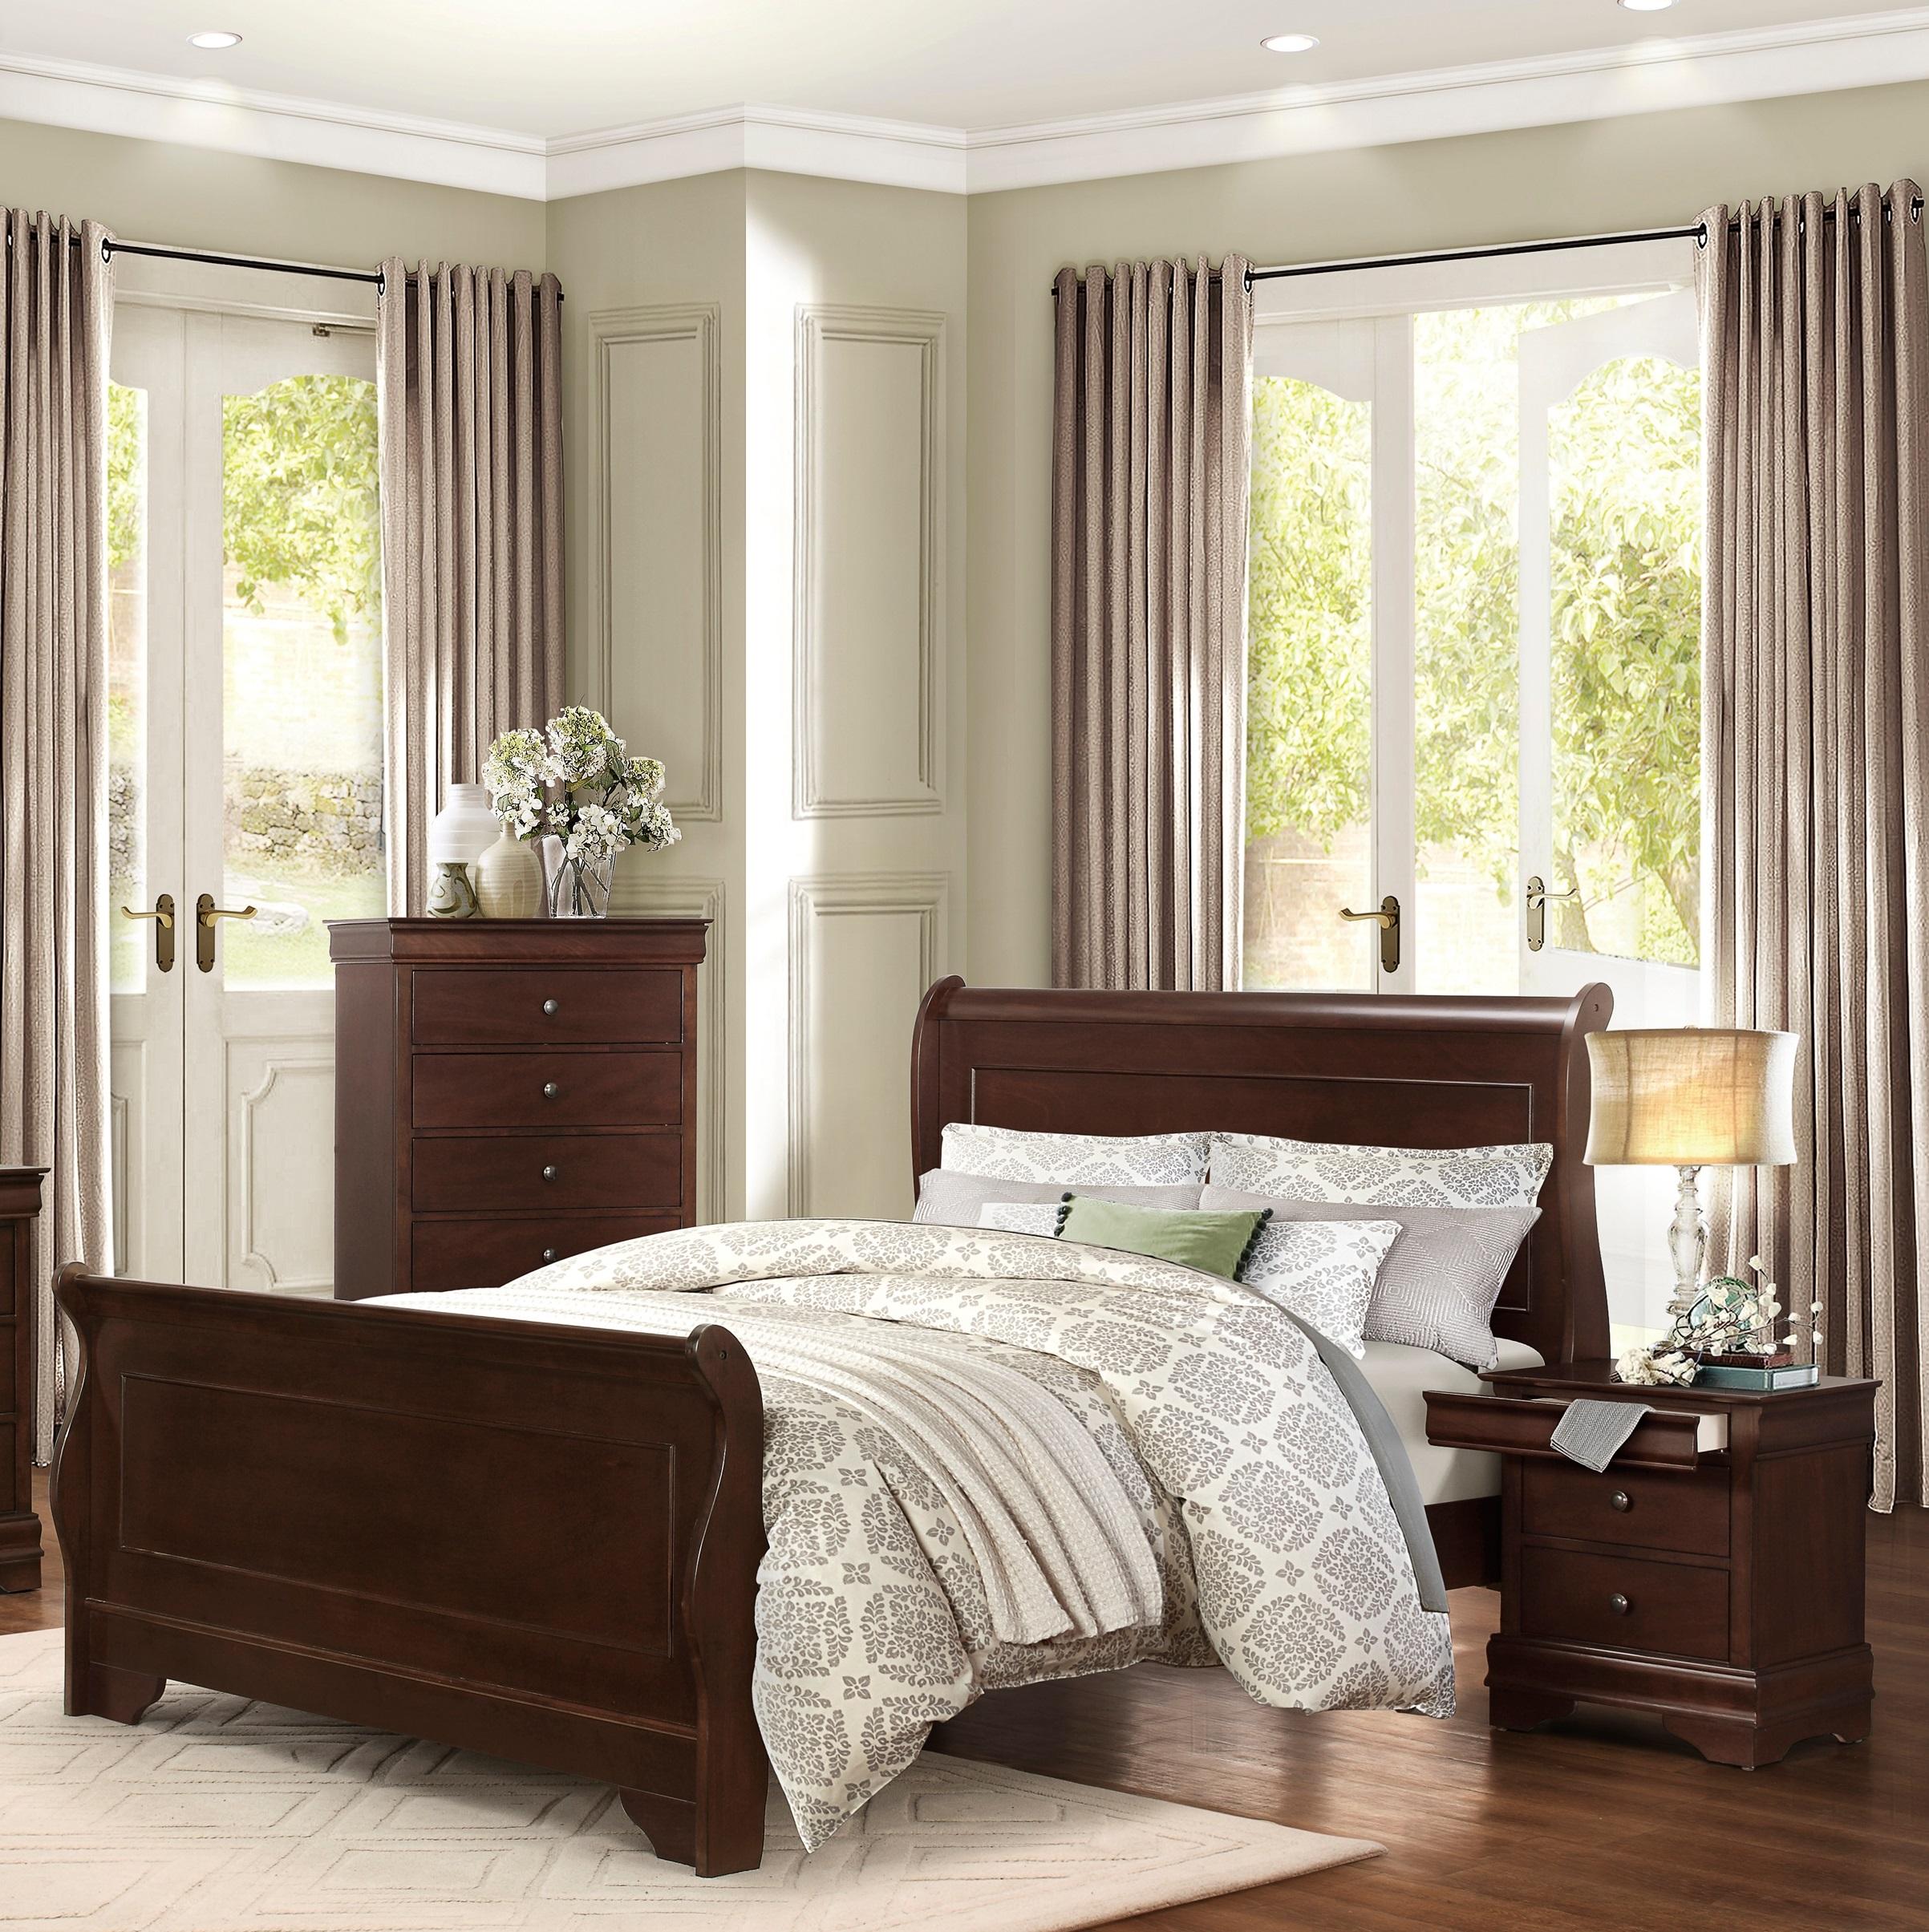 Modern Bedroom Set 1856F-1-3PC Abbeville 1856F-1-3PC in Cherry 